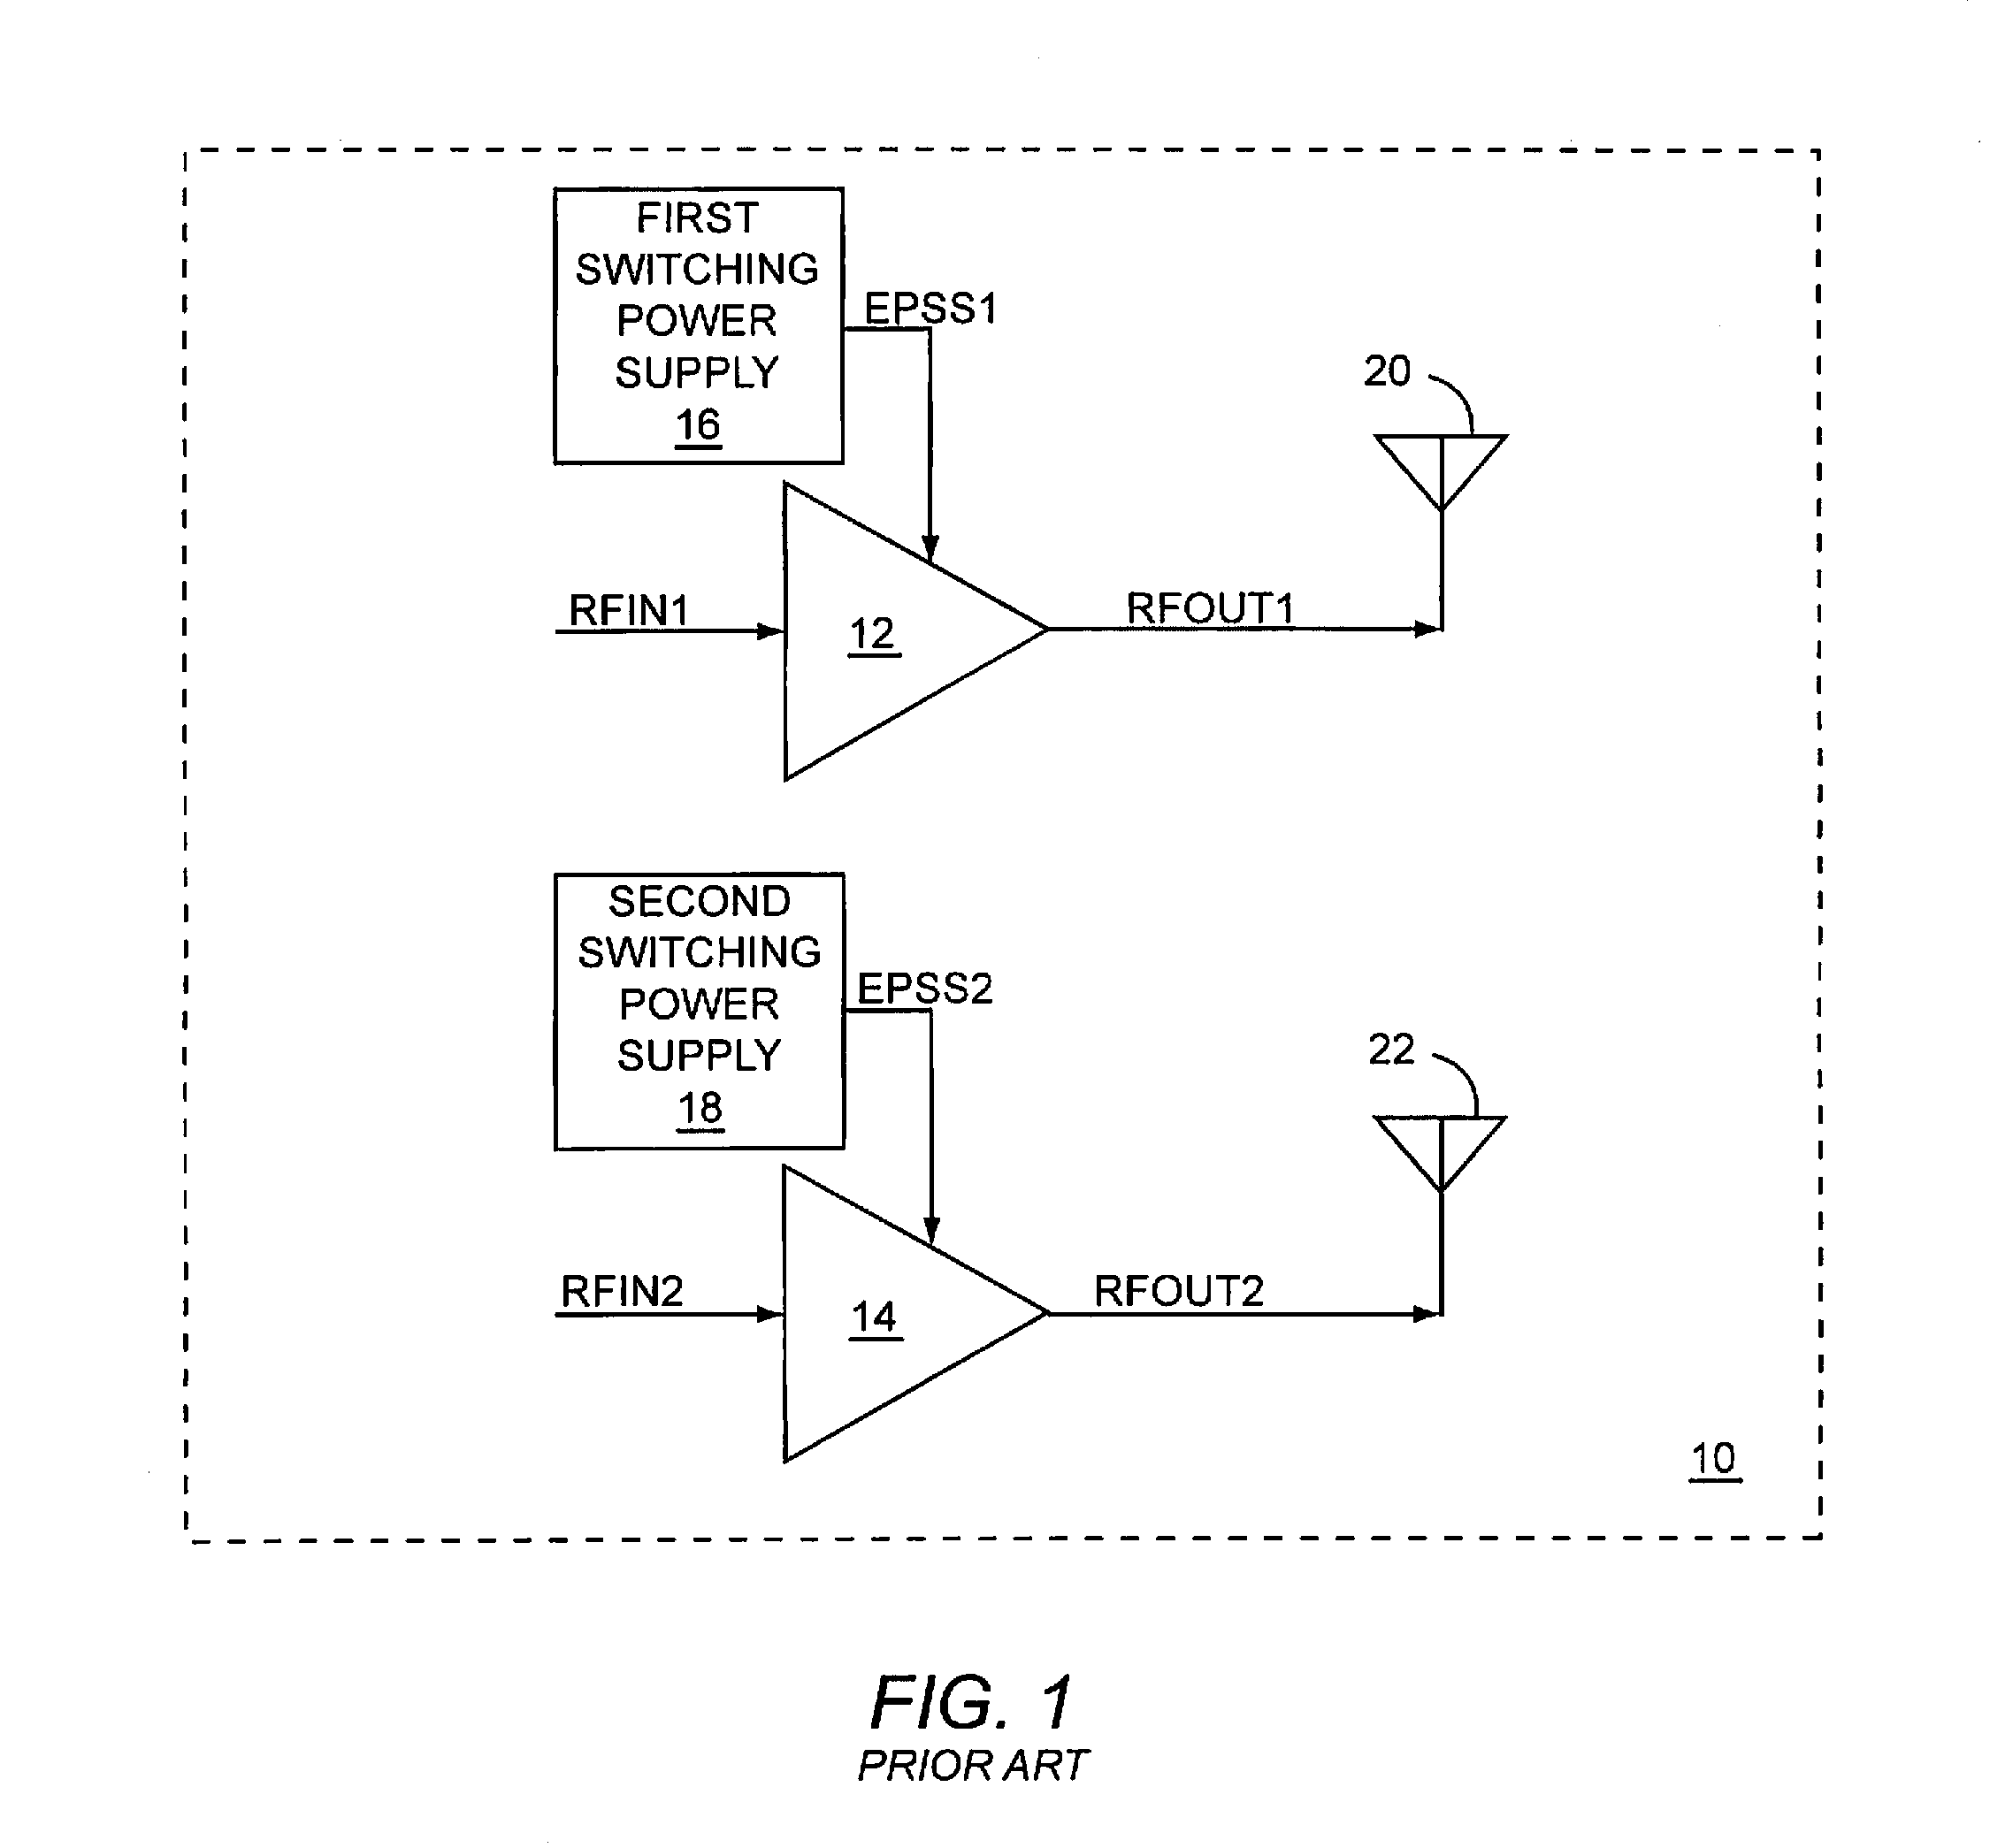 Optimized power amplifier and switching power supply topology